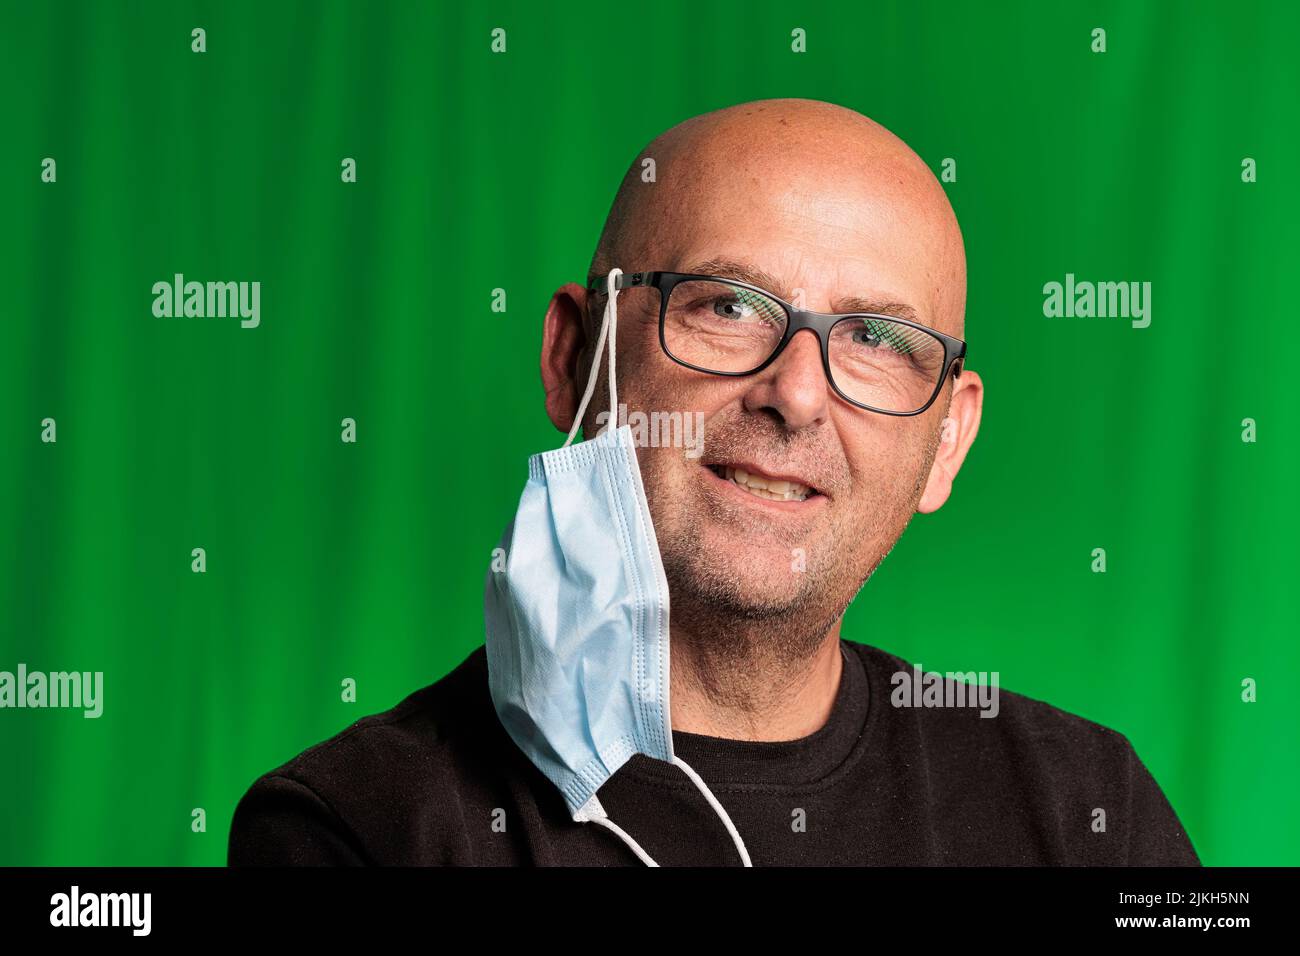 portrait bald man with glasses and green background with covid mask Stock Photo